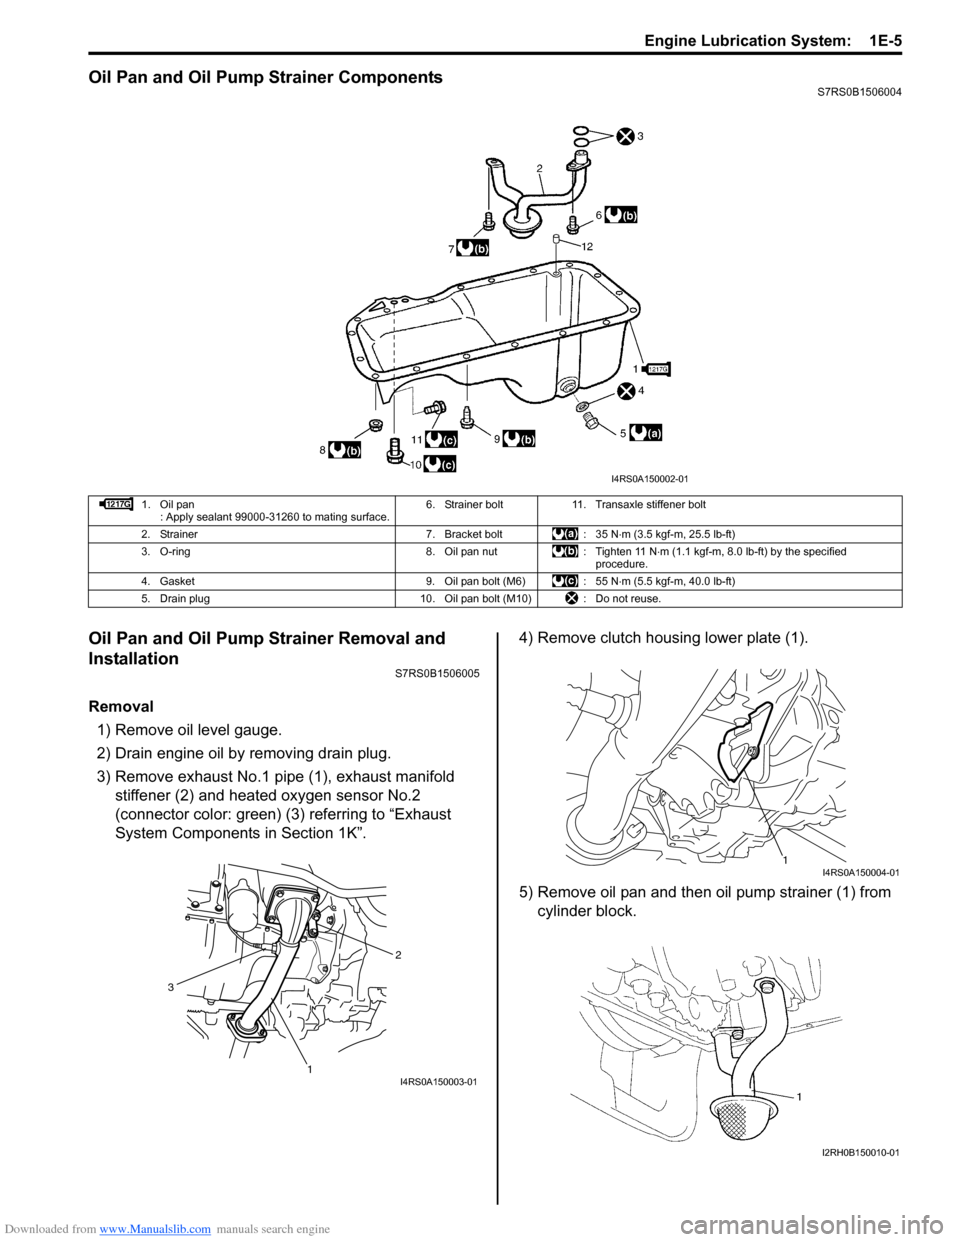 SUZUKI SWIFT 2005 2.G Service Workshop Manual Downloaded from www.Manualslib.com manuals search engine Engine Lubrication System:  1E-5
Oil Pan and Oil Pump Strainer ComponentsS7RS0B1506004
Oil Pan and Oil Pump Strainer Removal and 
Installation
